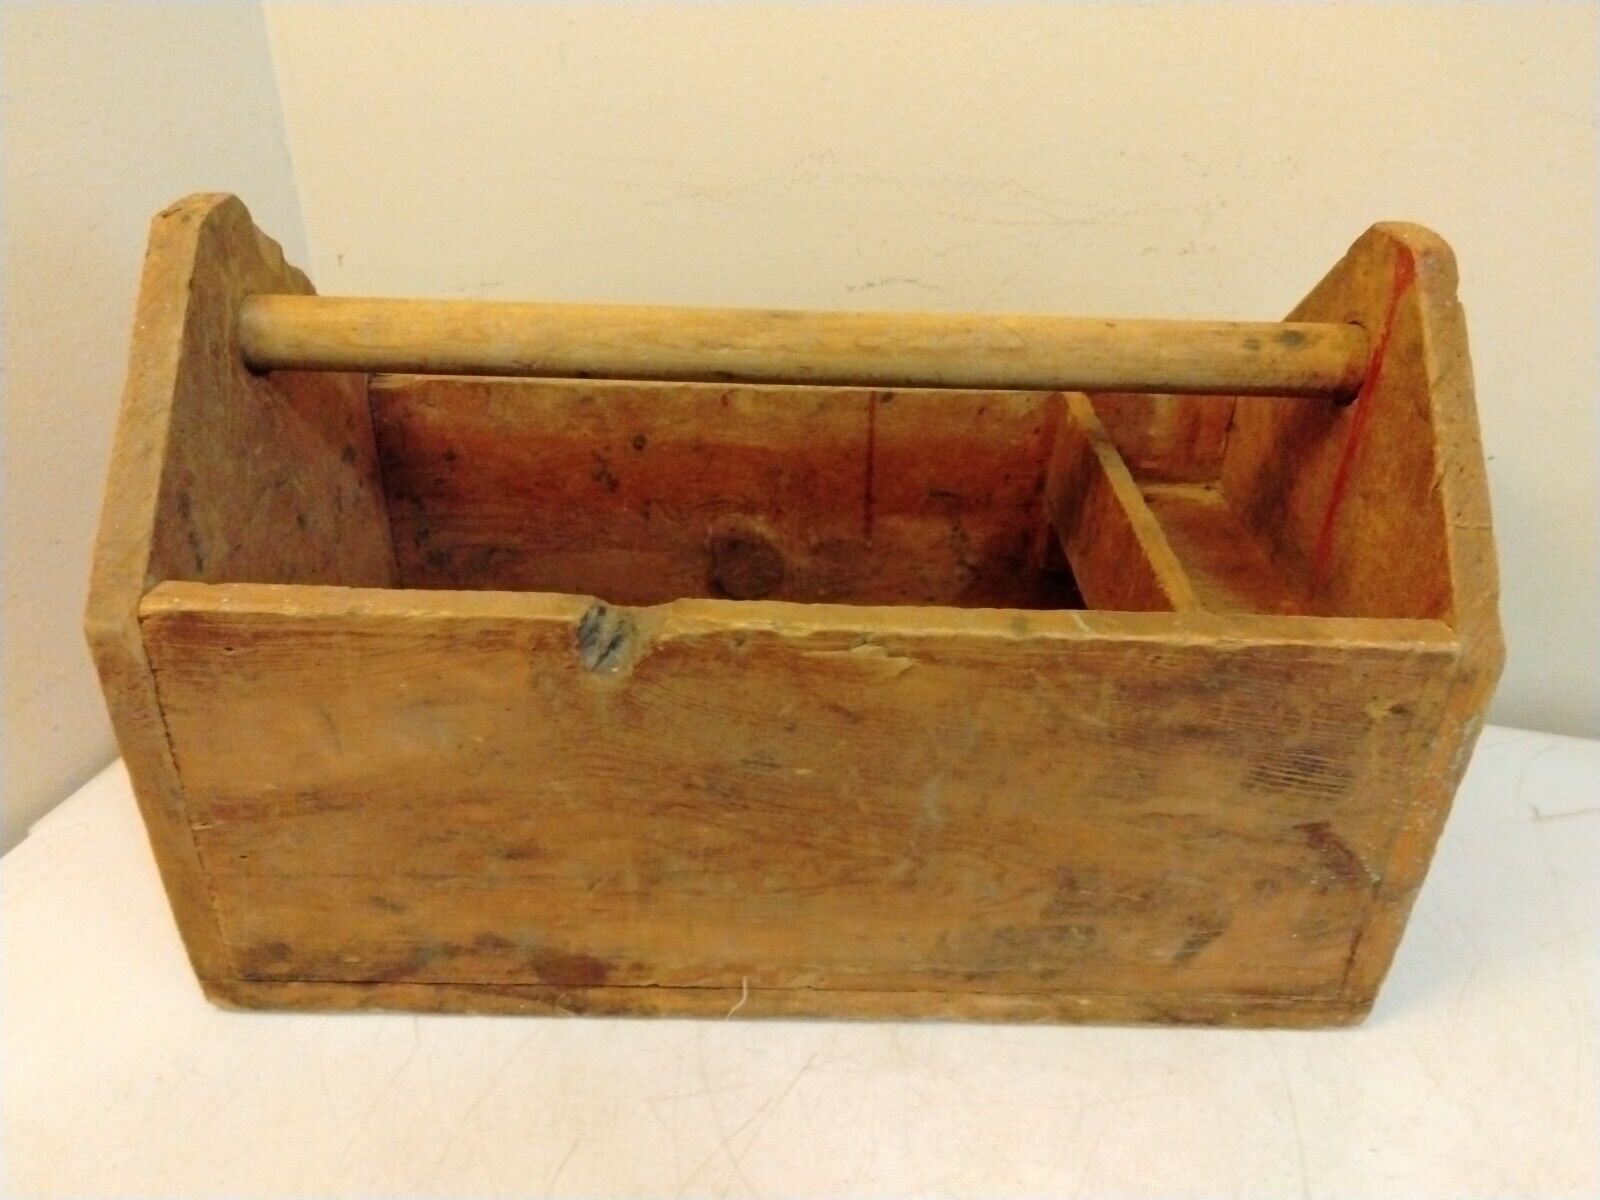 Vintage Rustic Wooden Carpenters Tool Box Caddy Wooden Handle 21 X 13 X 12